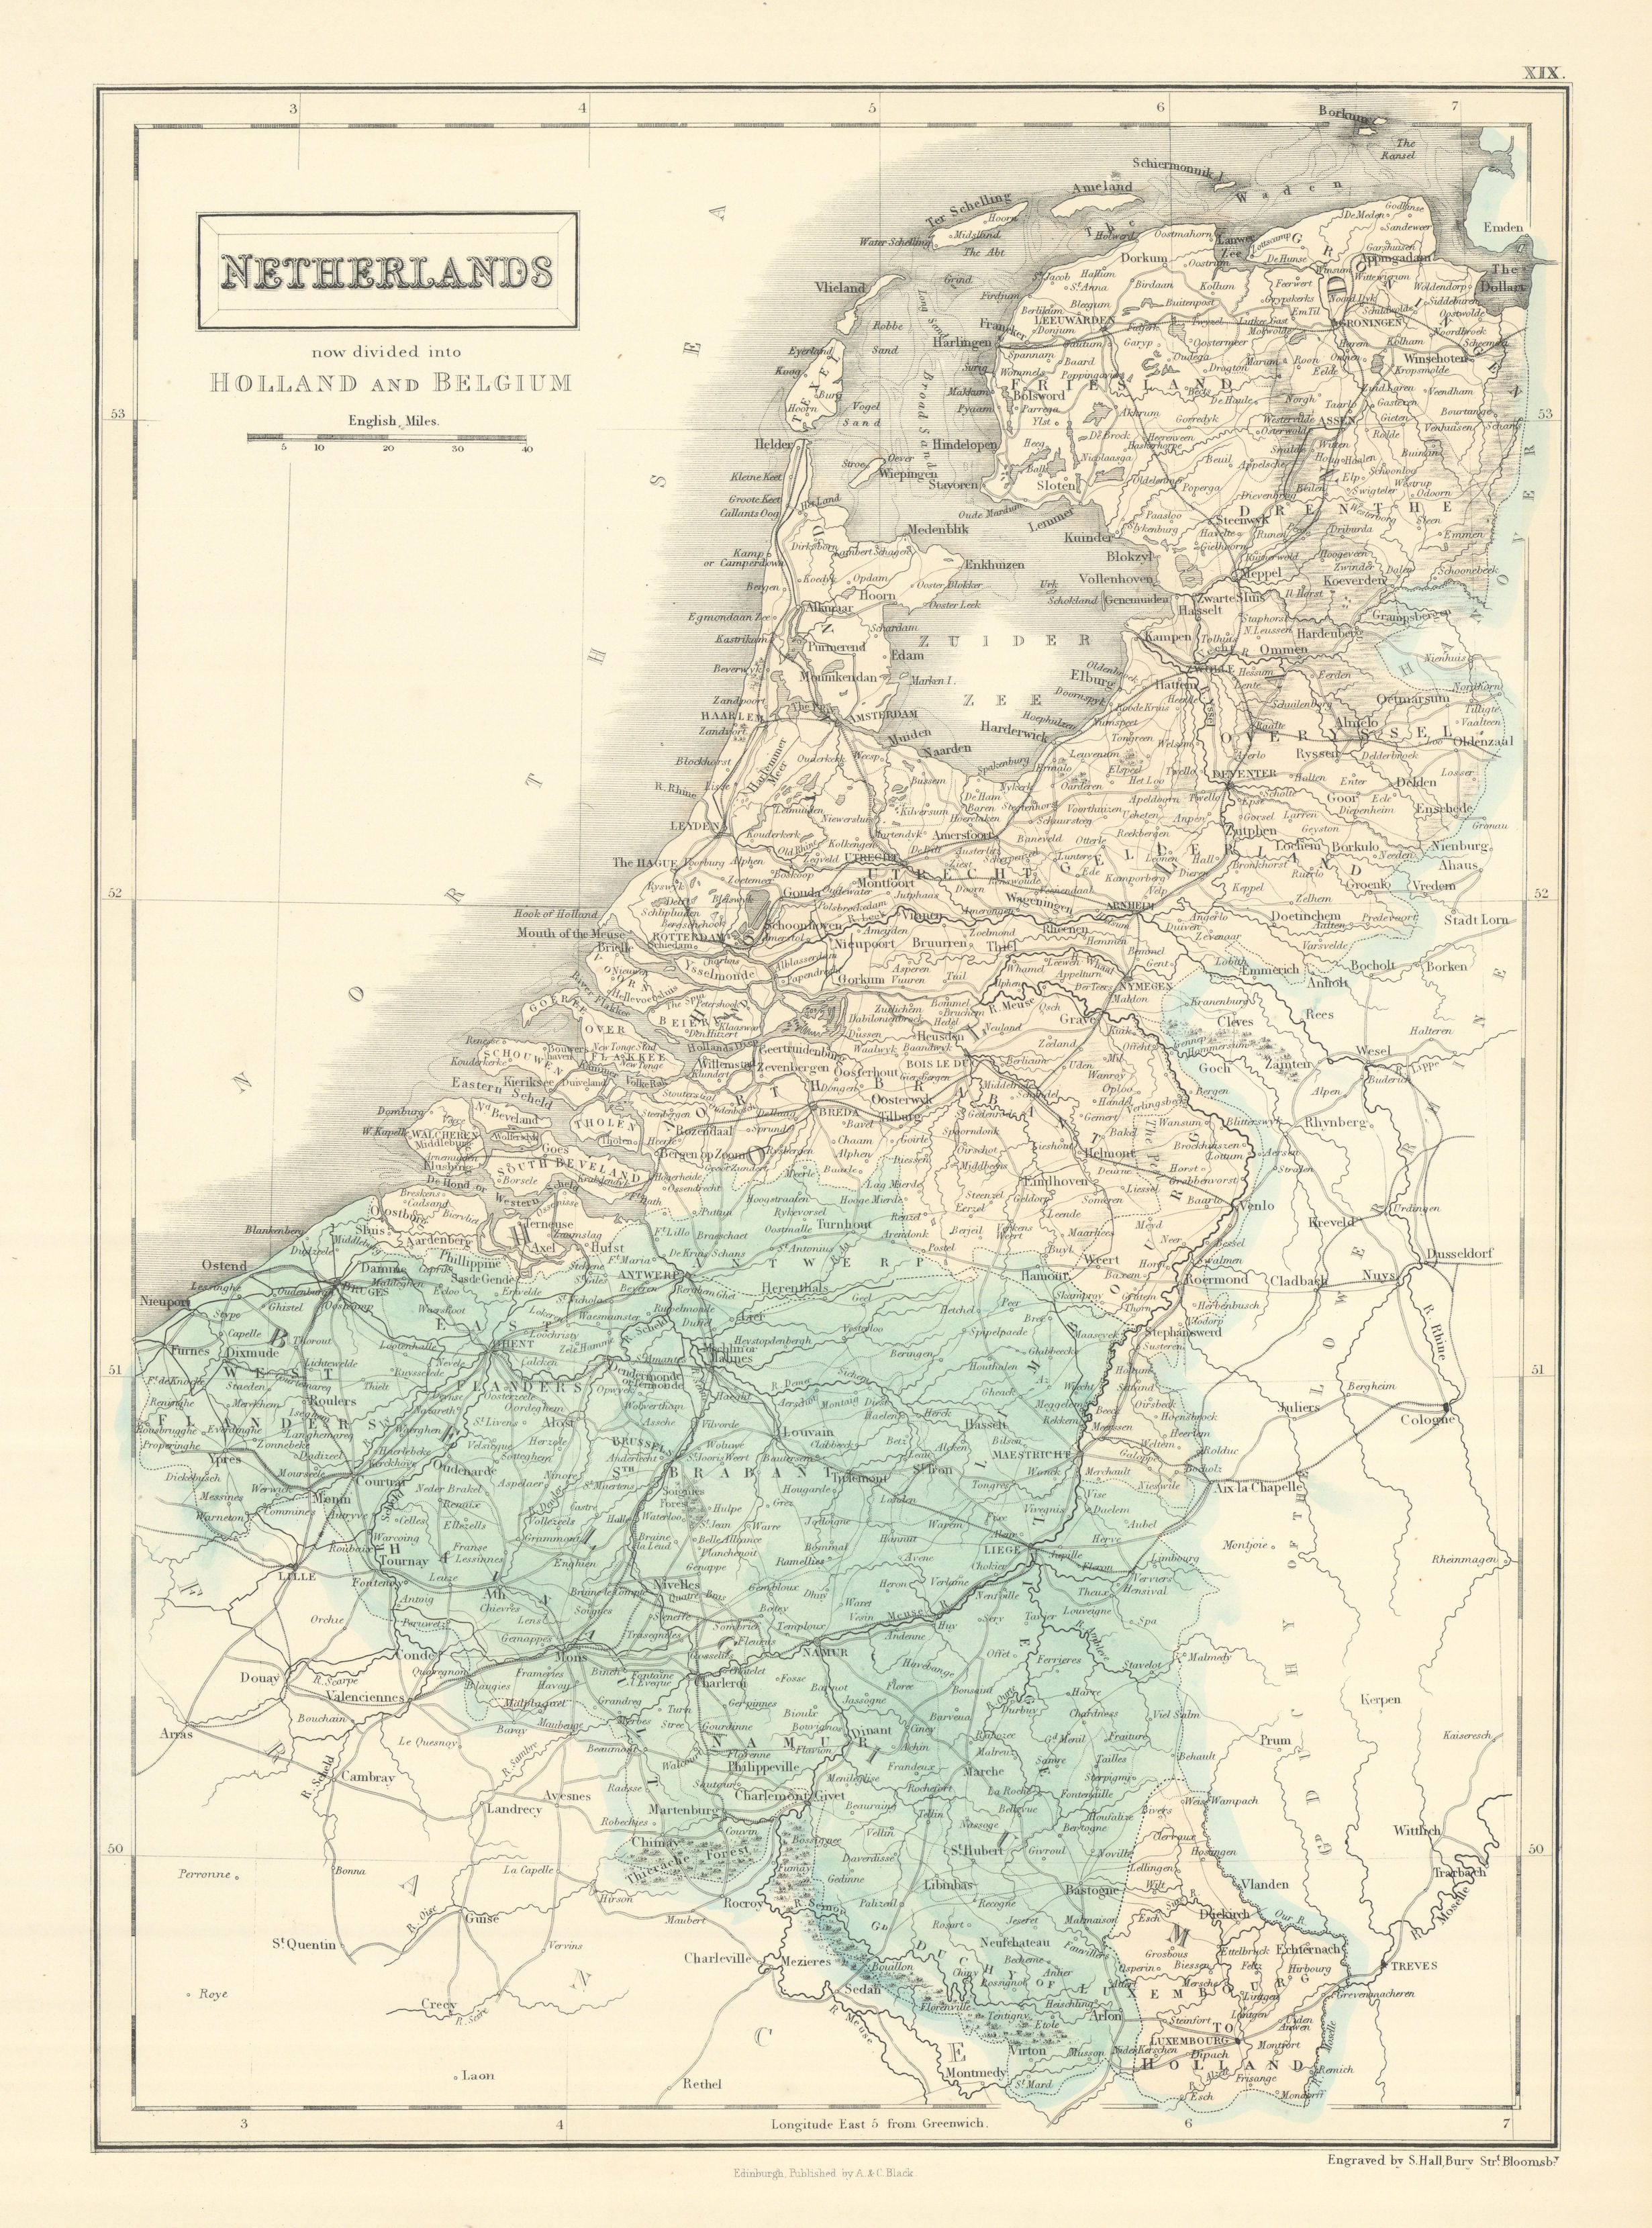 Associate Product "Netherlands, now divided into Holland & Belgium". Benelux. SIDNEY HALL 1854 map